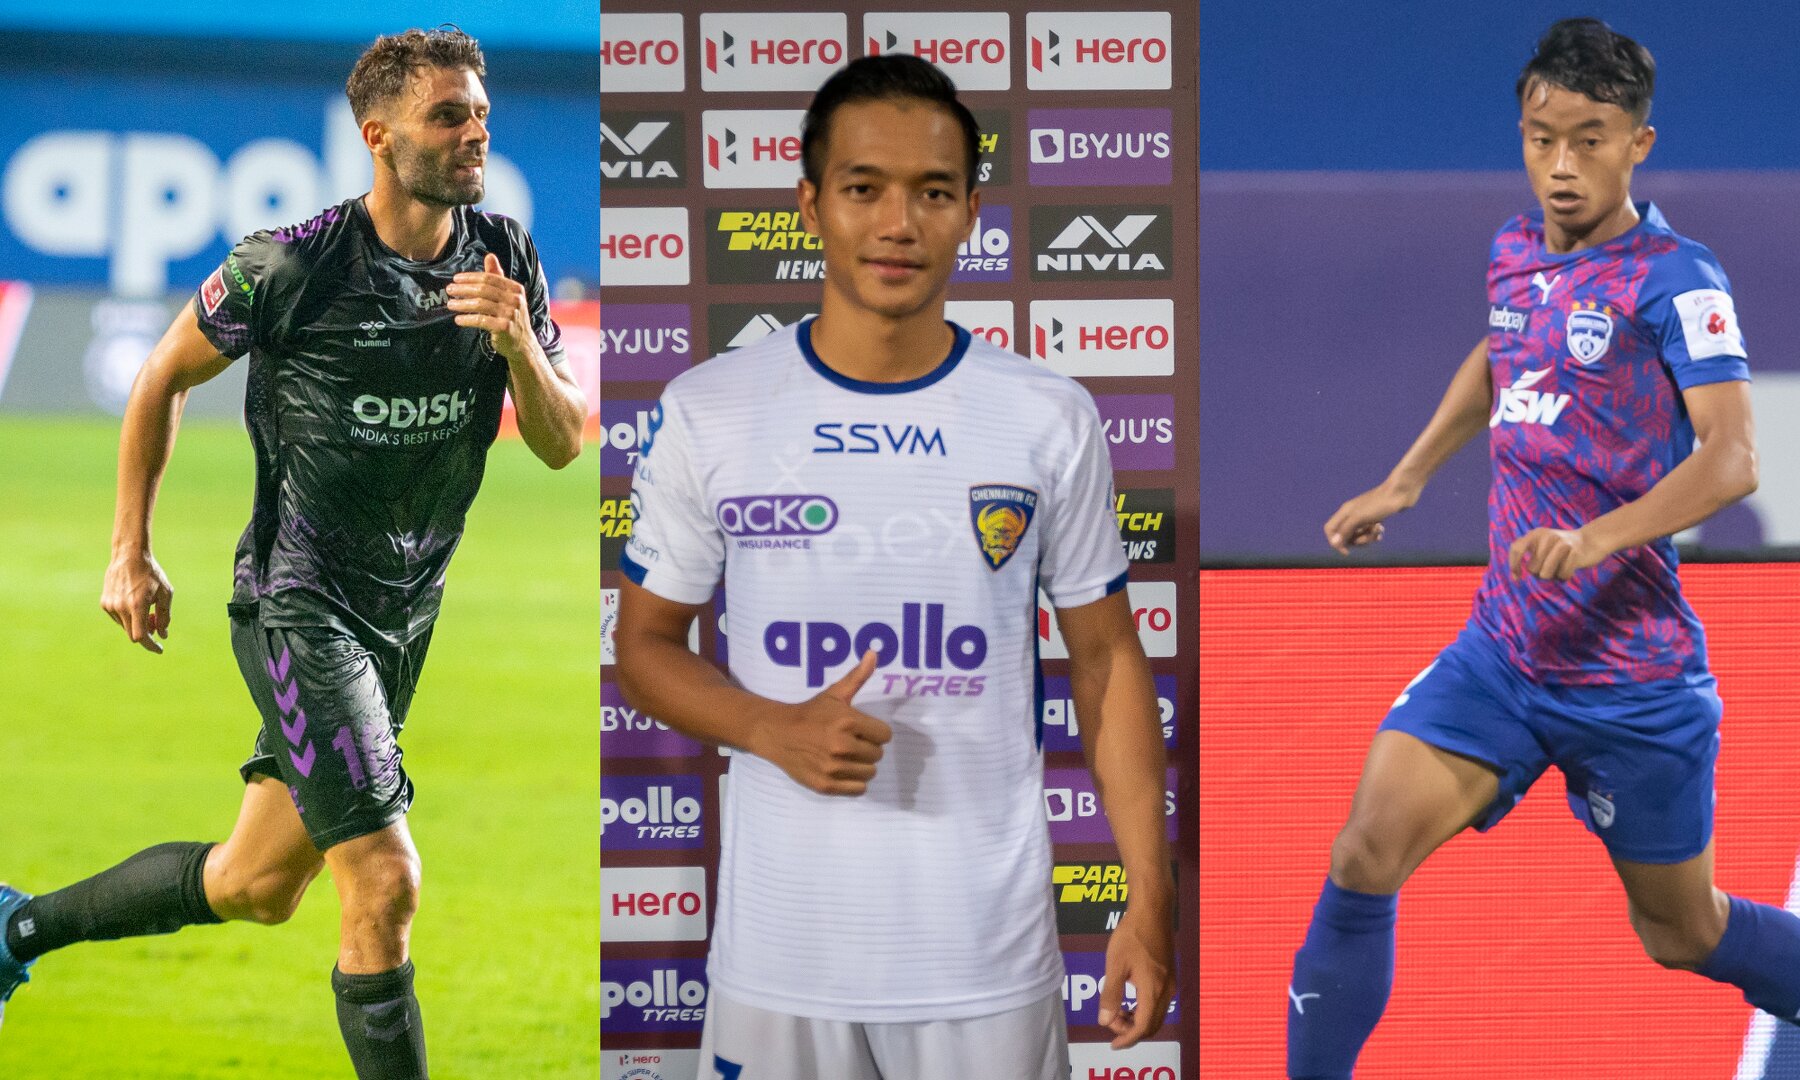 ISL 2021-22 Team of the Month